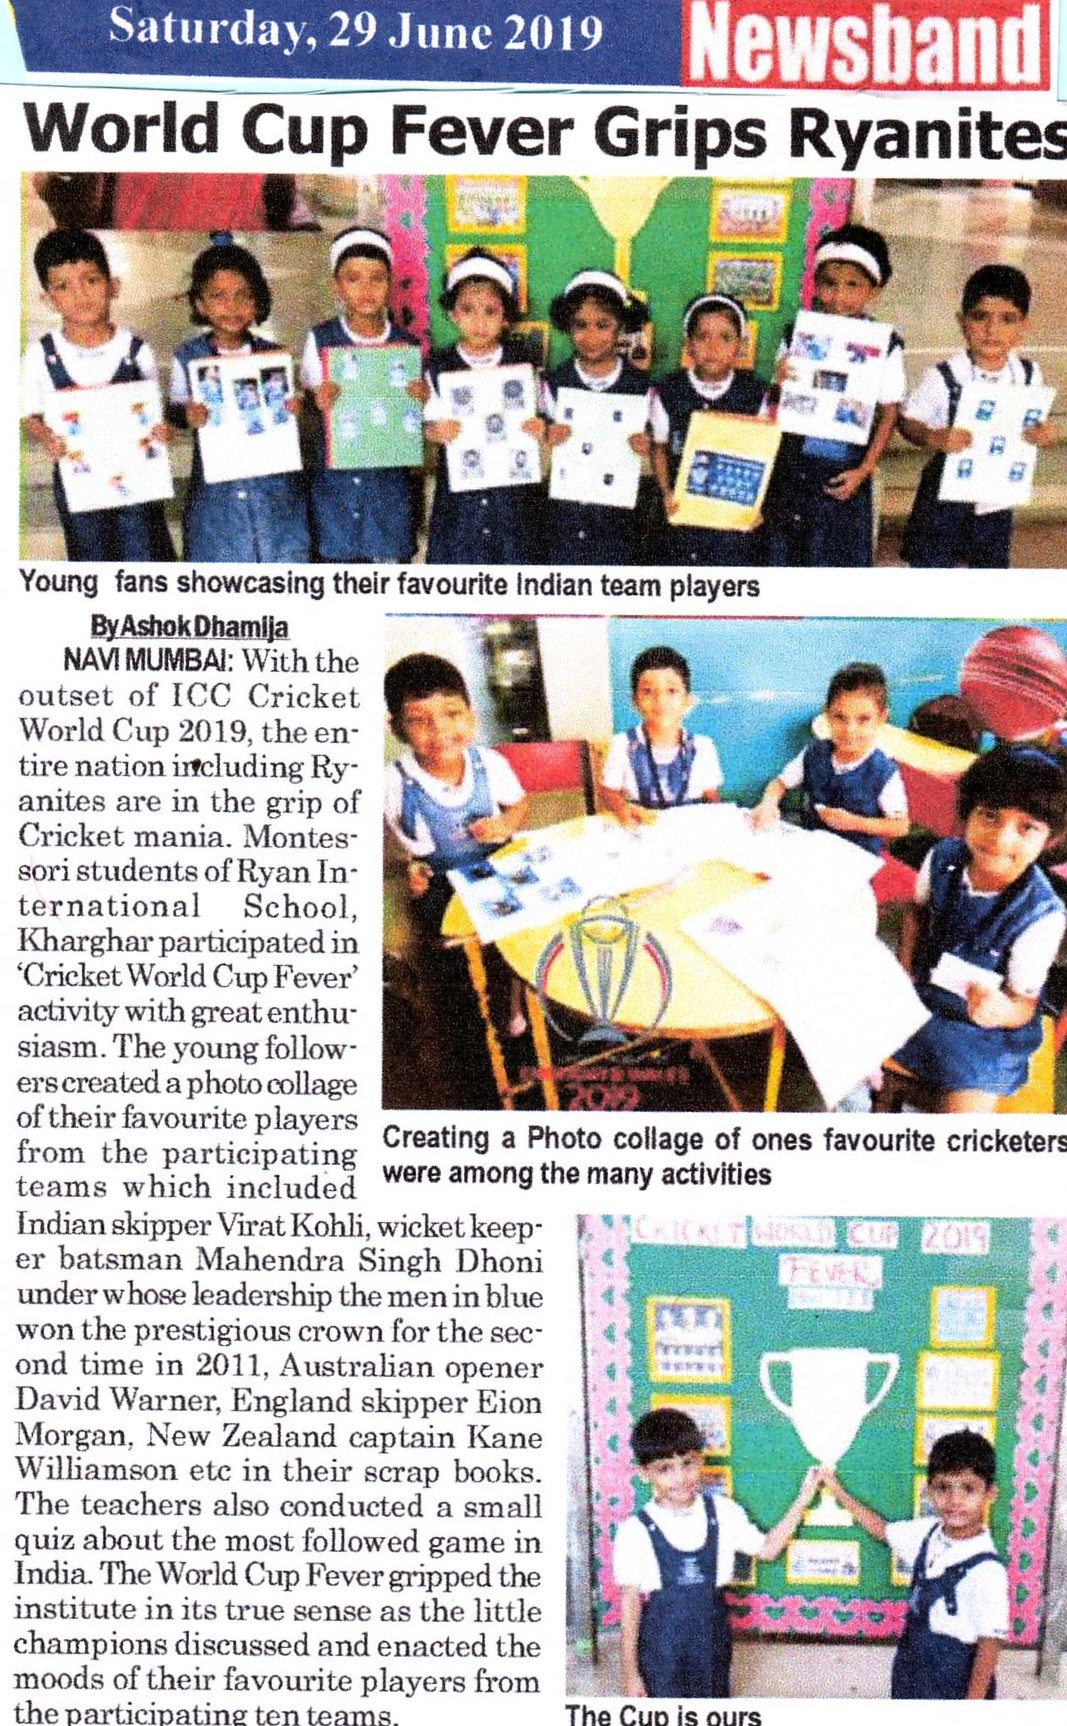 World cup fever grips Ryanites was mentioned in Newsband - Ryan International School, Kharghar